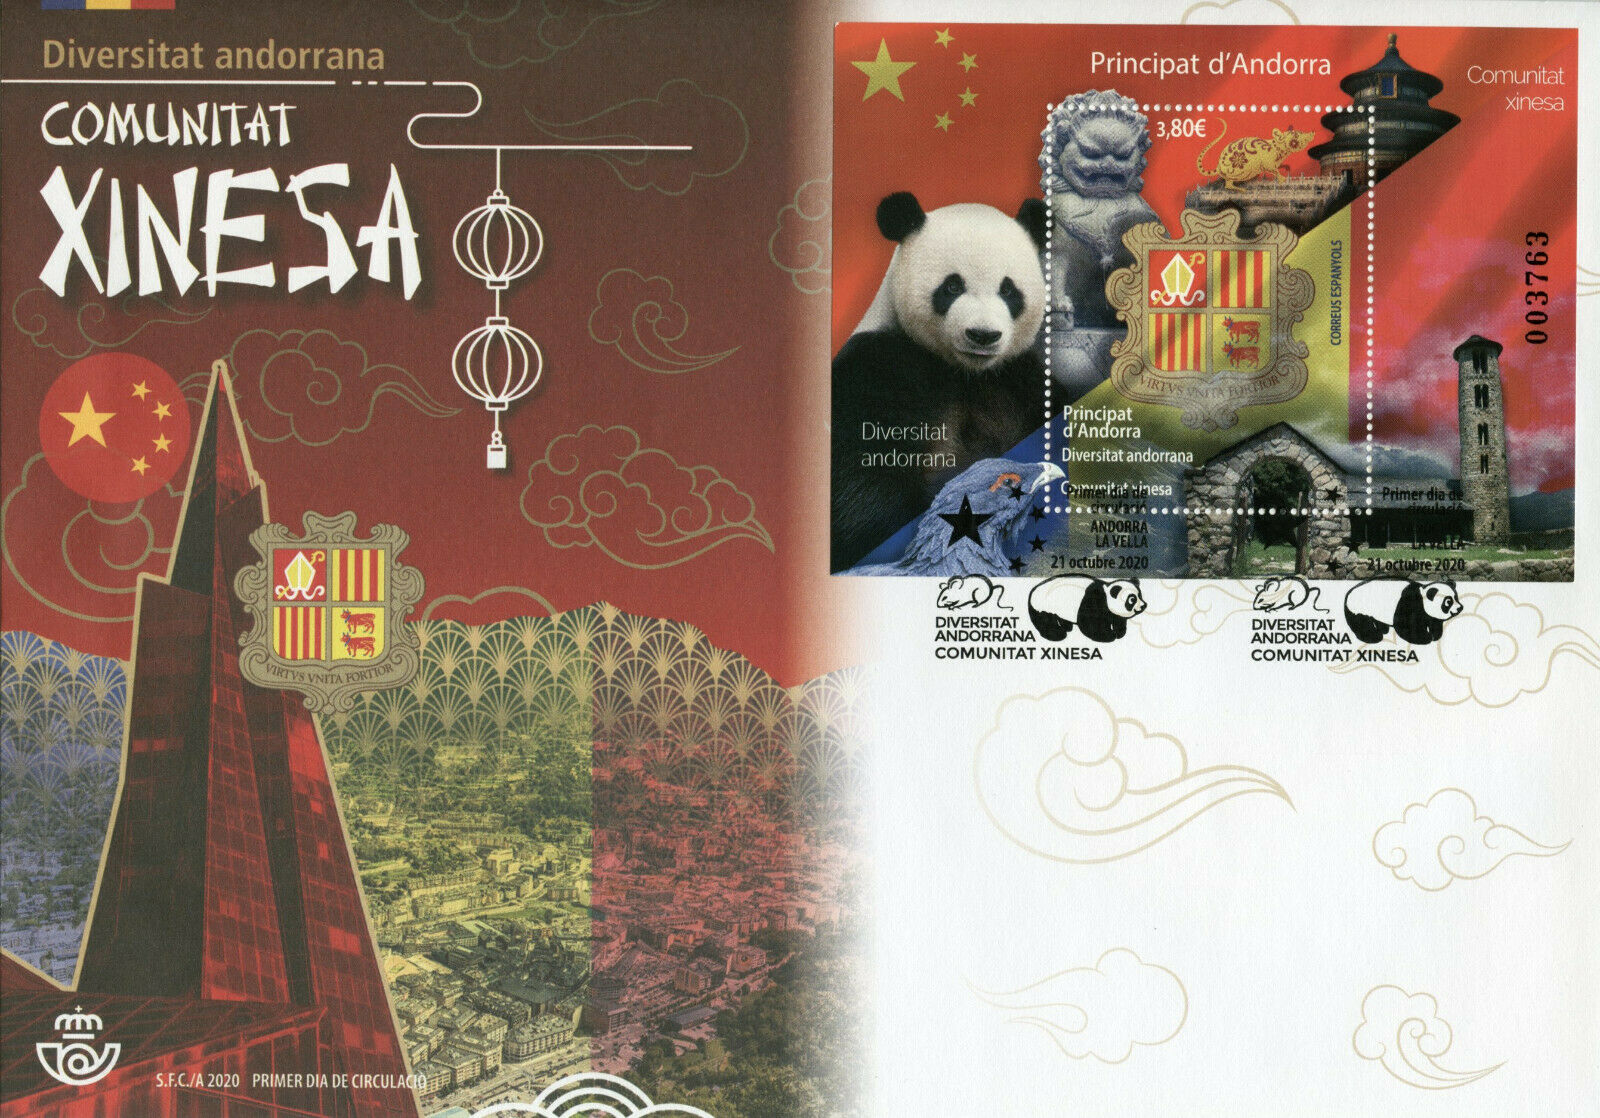 Spanish Andorra Cultures Stamps 2020 FDC Chinese Community Giant Pandas 1v M/S